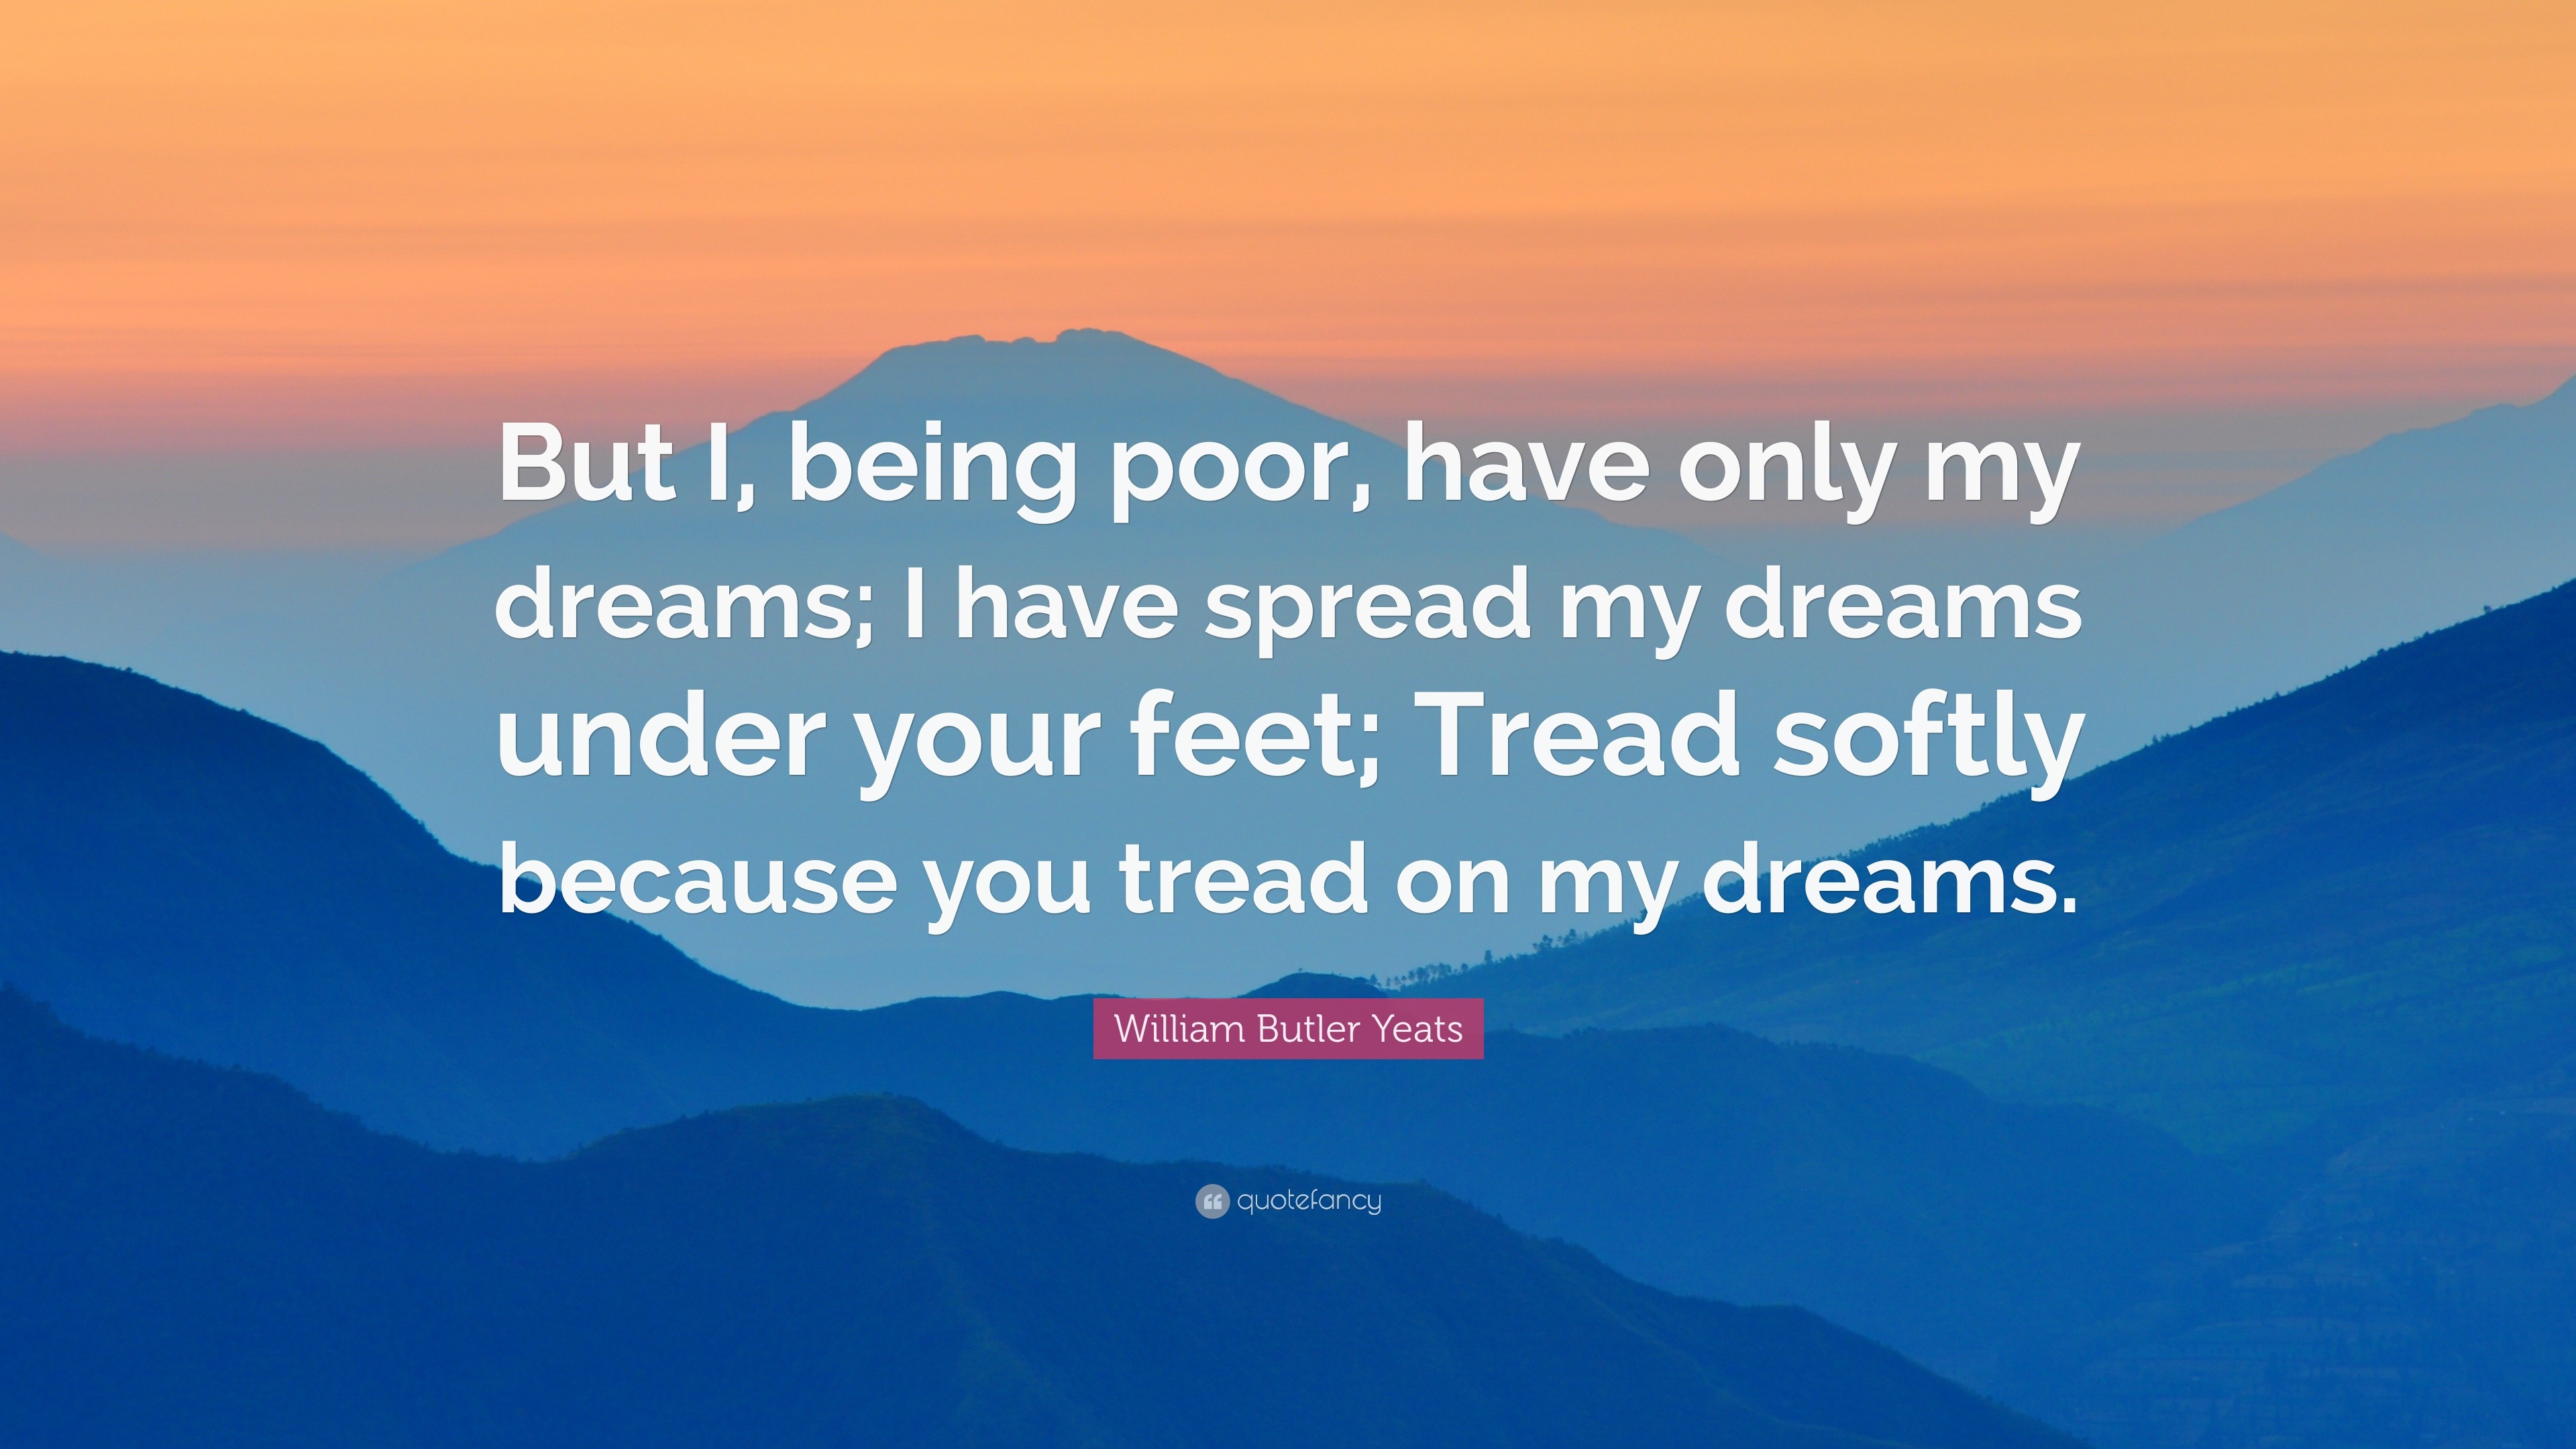 William Butler Yeats Quote: “But I, being poor, have only my dreams; I have spread my dreams under your feet; softly because you tread on my dr...”